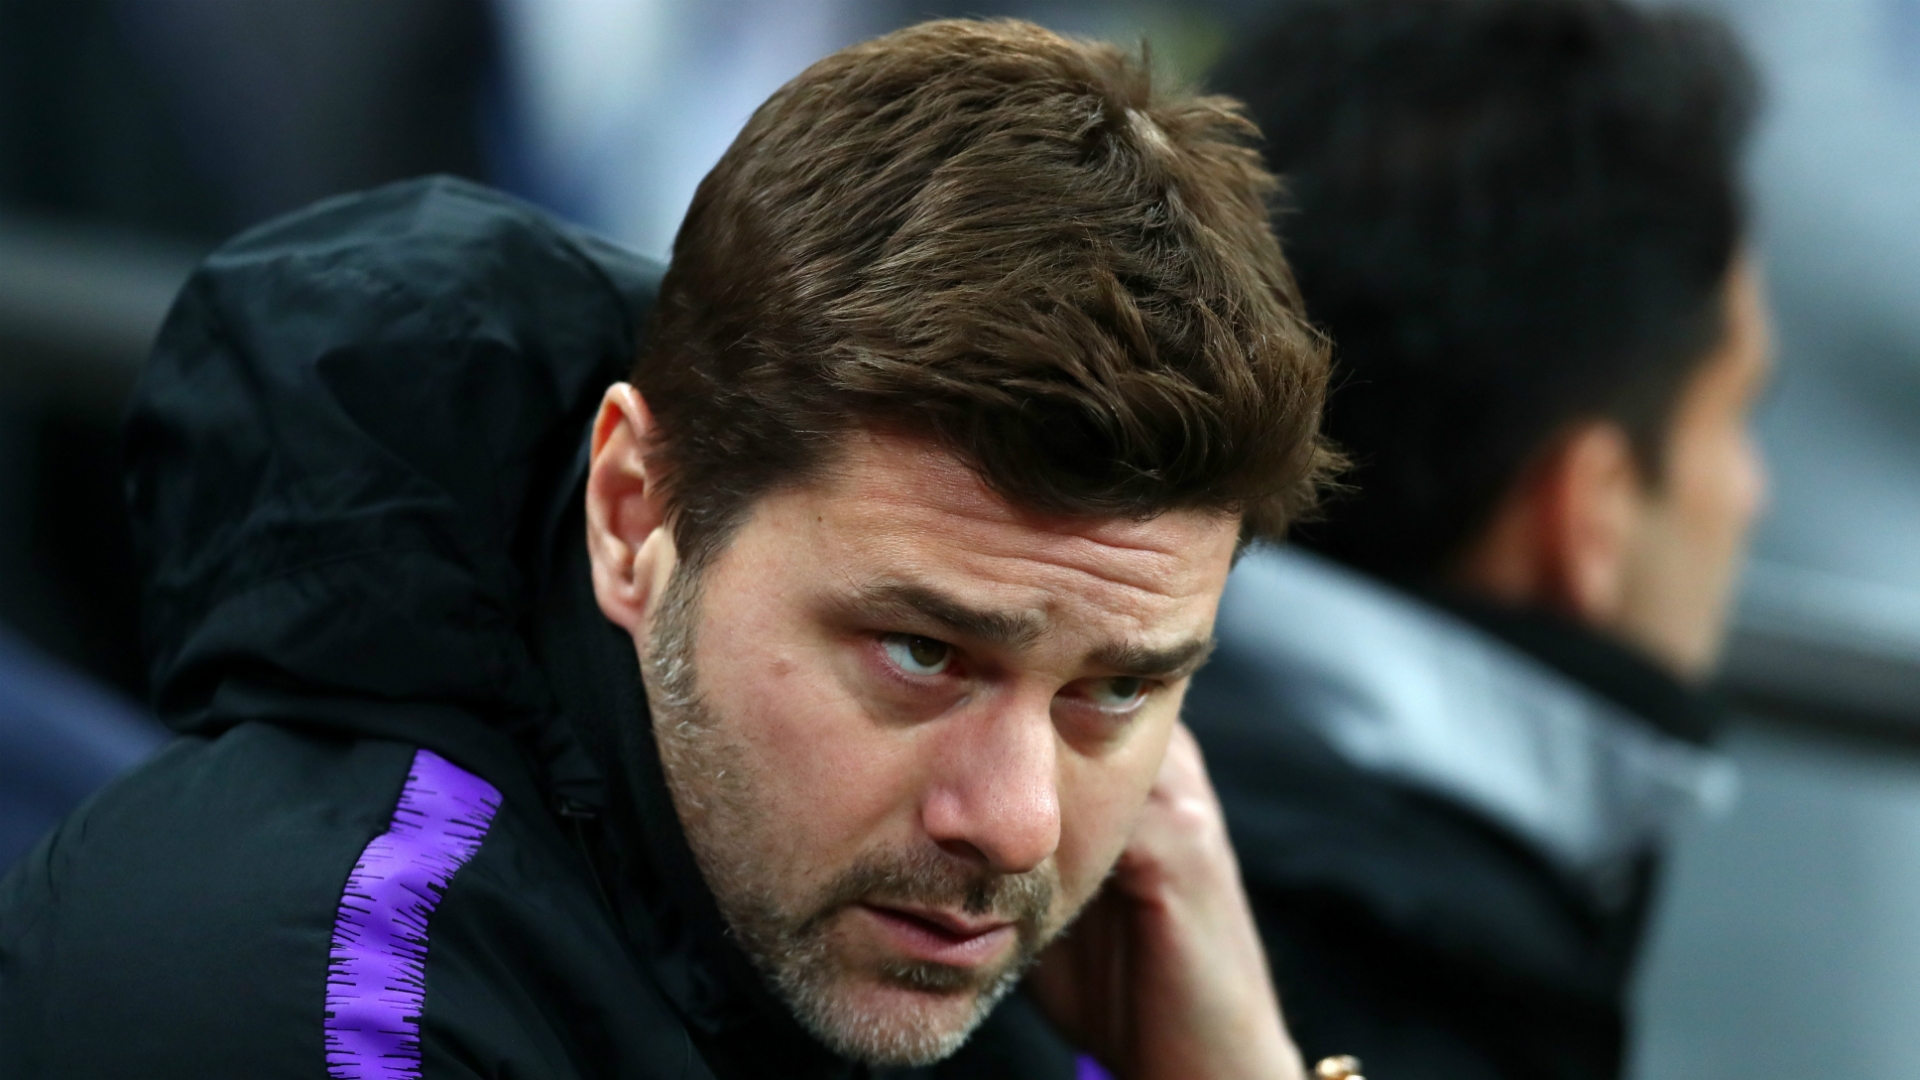 PSG will not seek to prevent Manchester United from signing Mauricio Pochettino